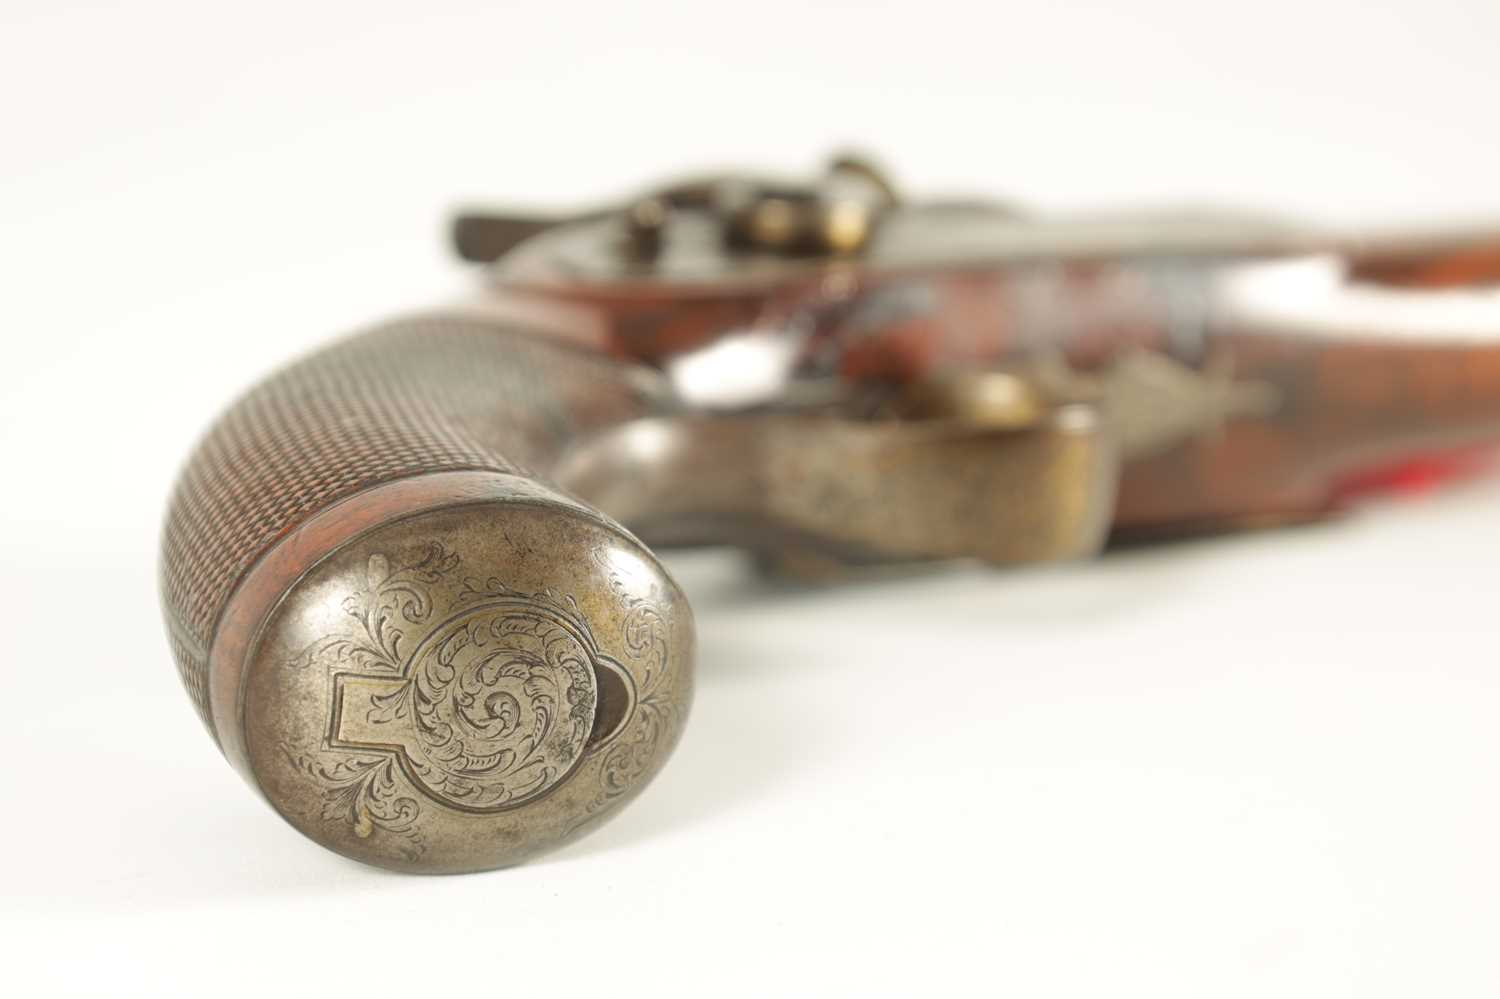 G R COLLIS, BIRMINGHAM. AN EARLY 19TH CENTURY WALNUT PERCUSSION HOLSTER PISTOL - Image 4 of 10